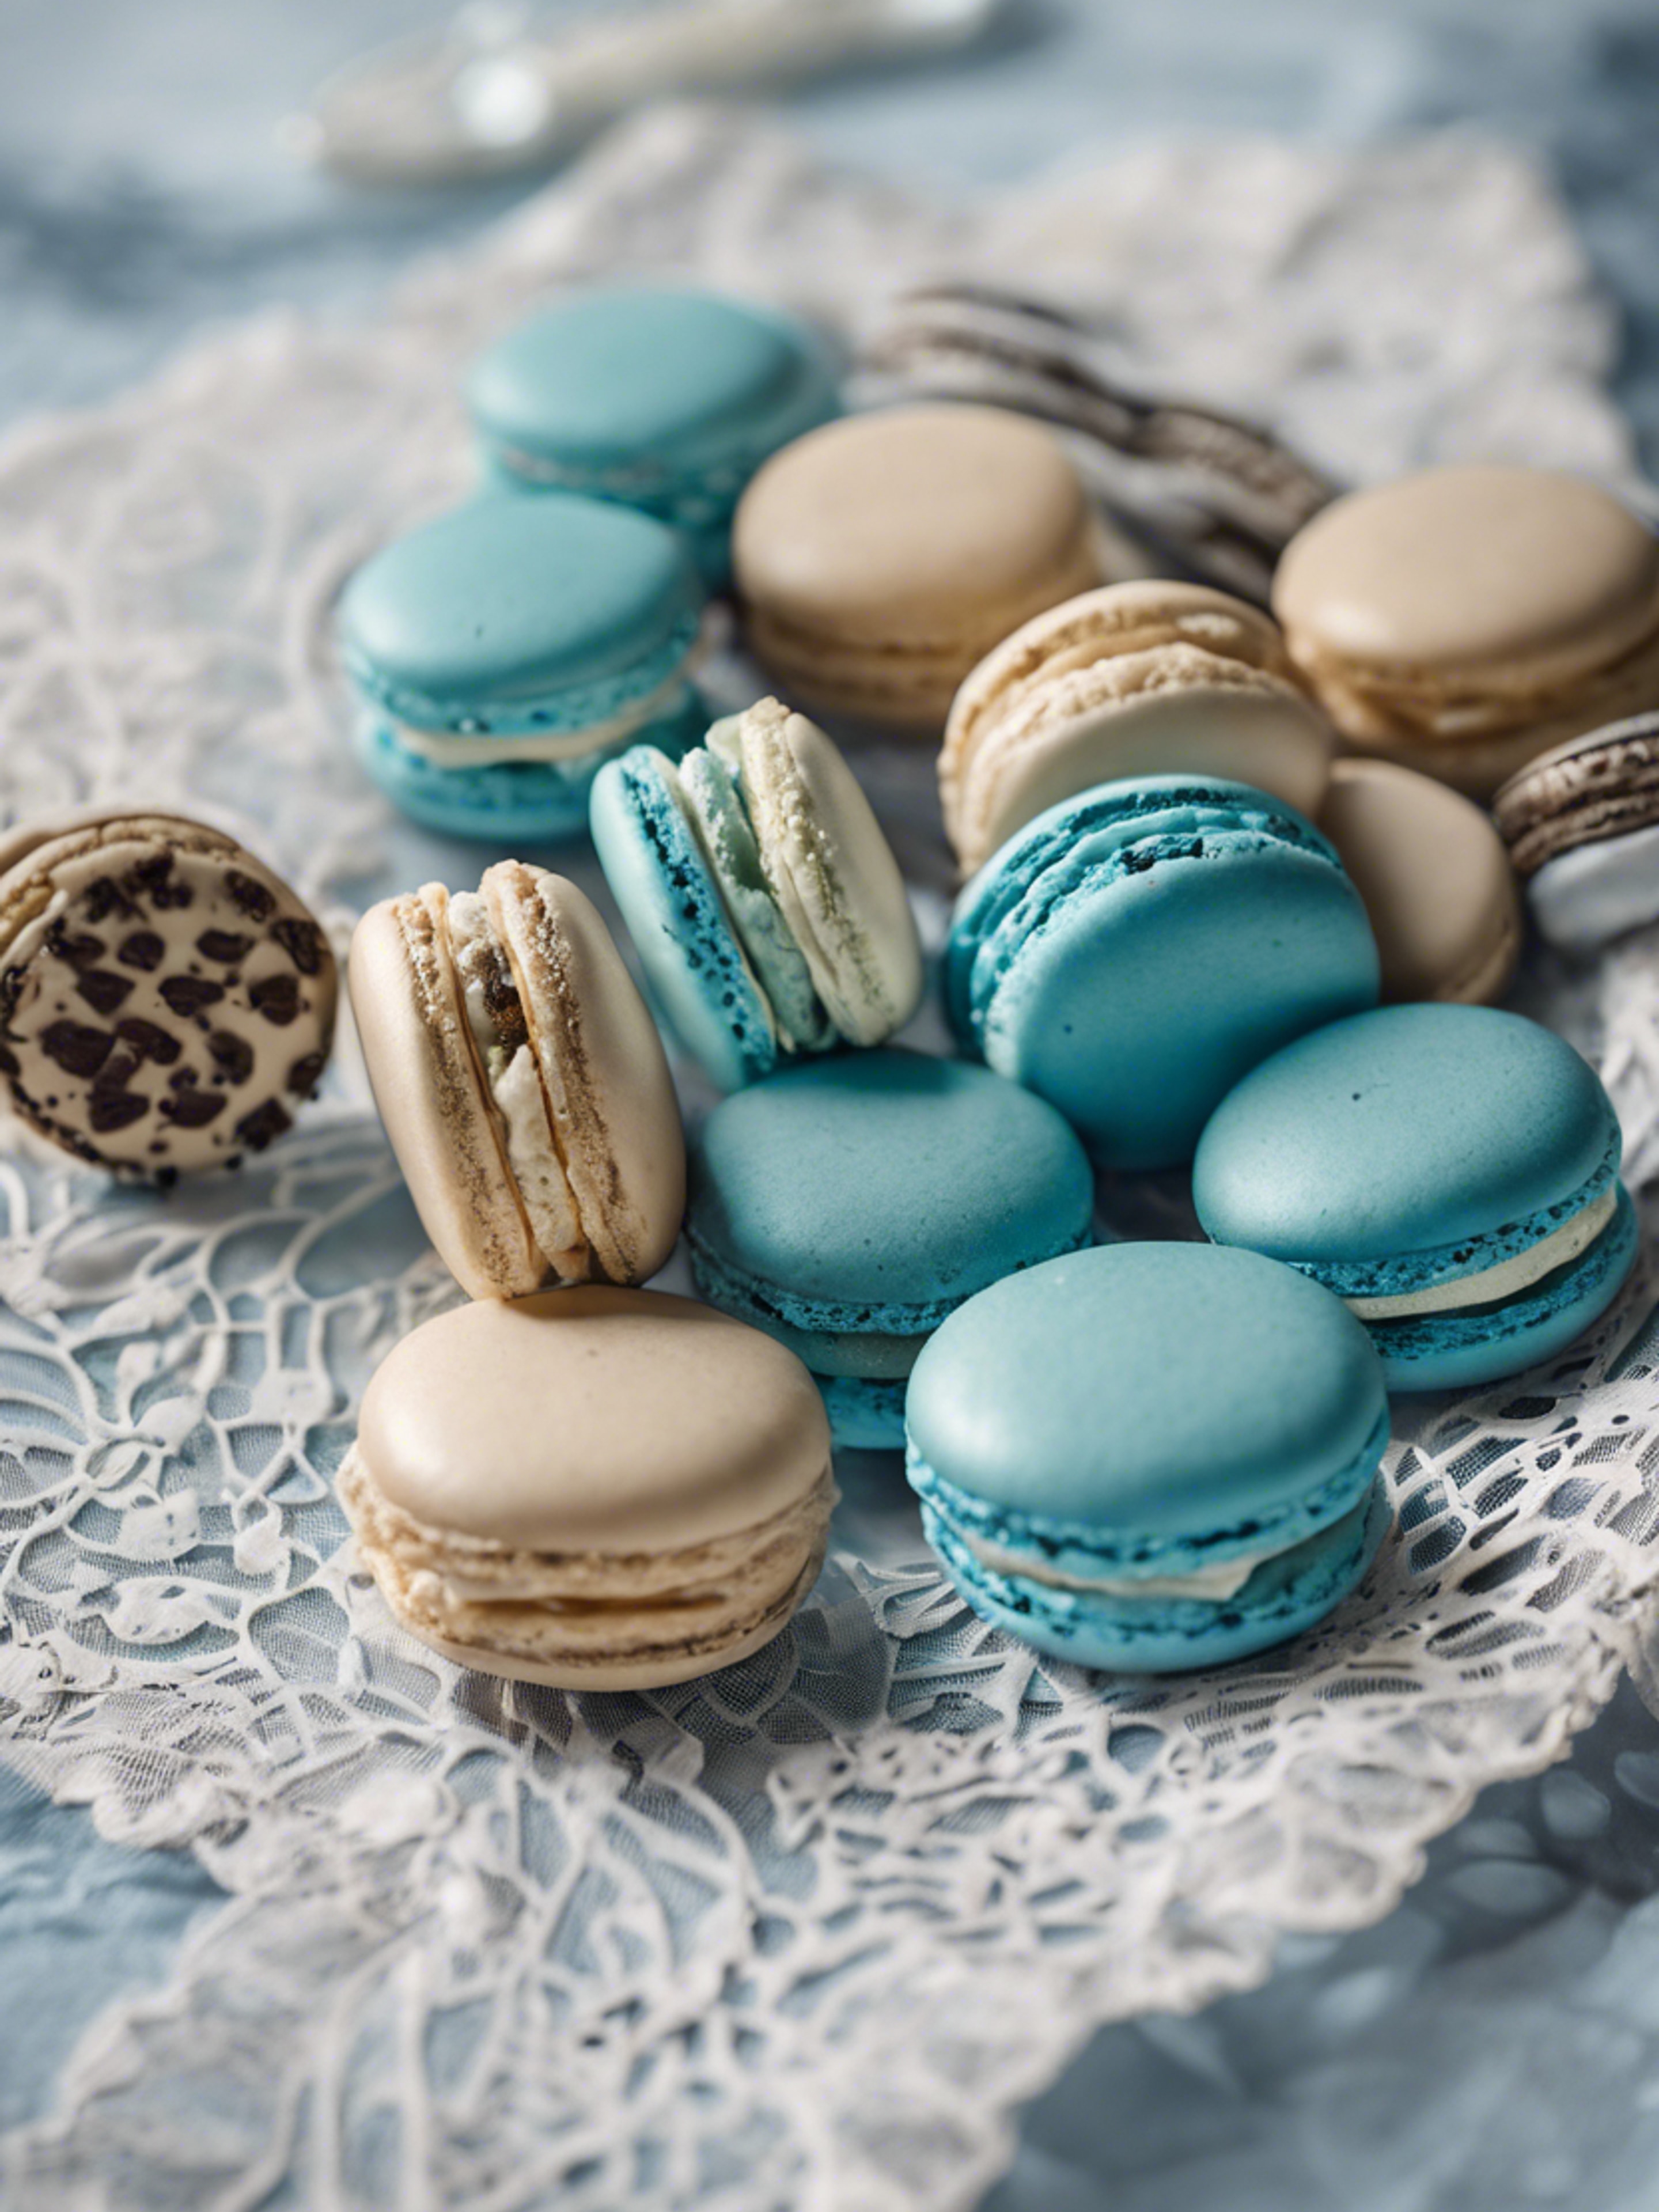 Blue French Macarons artistically arranged on an antique white lace tablecloth. ورق الجدران[73469cabdbbf44728762]